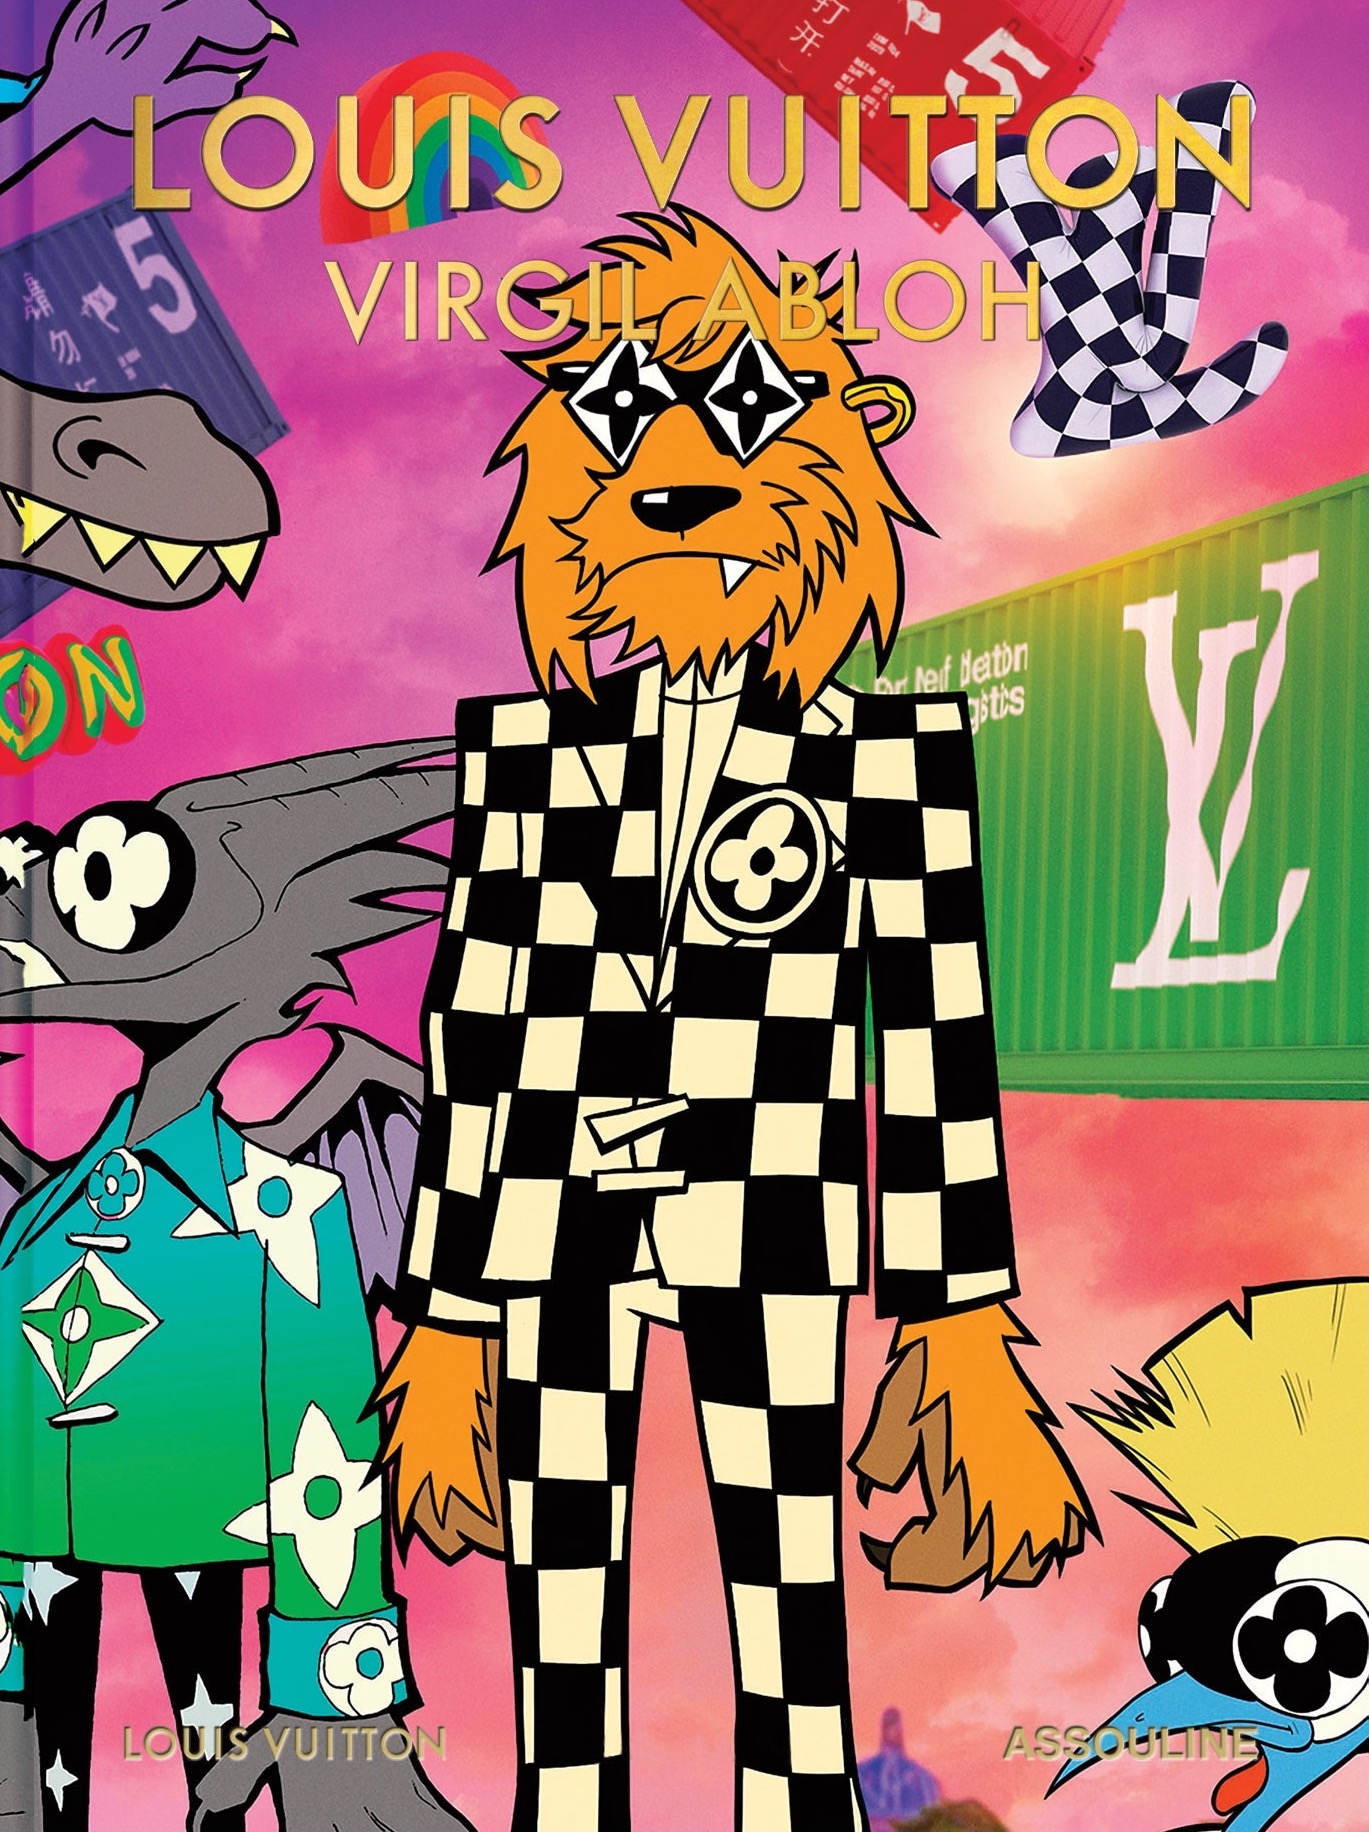 Louis Vuitton: Virgil Abloh (Classic Cartoon Cover) by Anders Christian  Madsen - Coffee Table Book